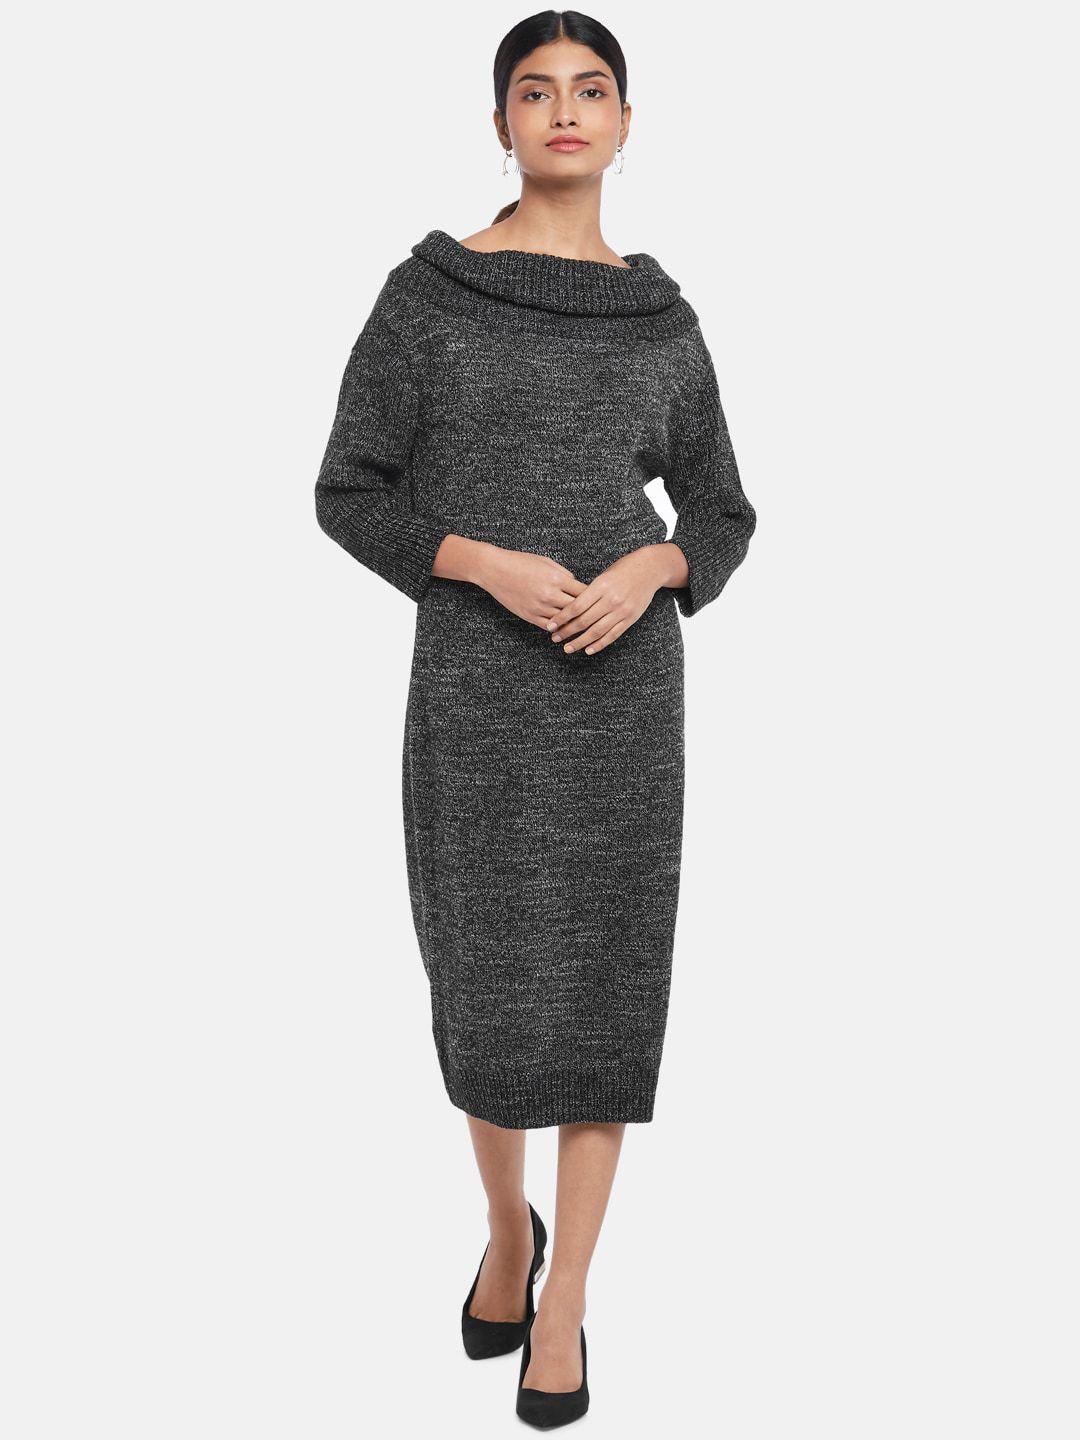 annabelle by pantaloons off-shoulder midi sweater sheath dress